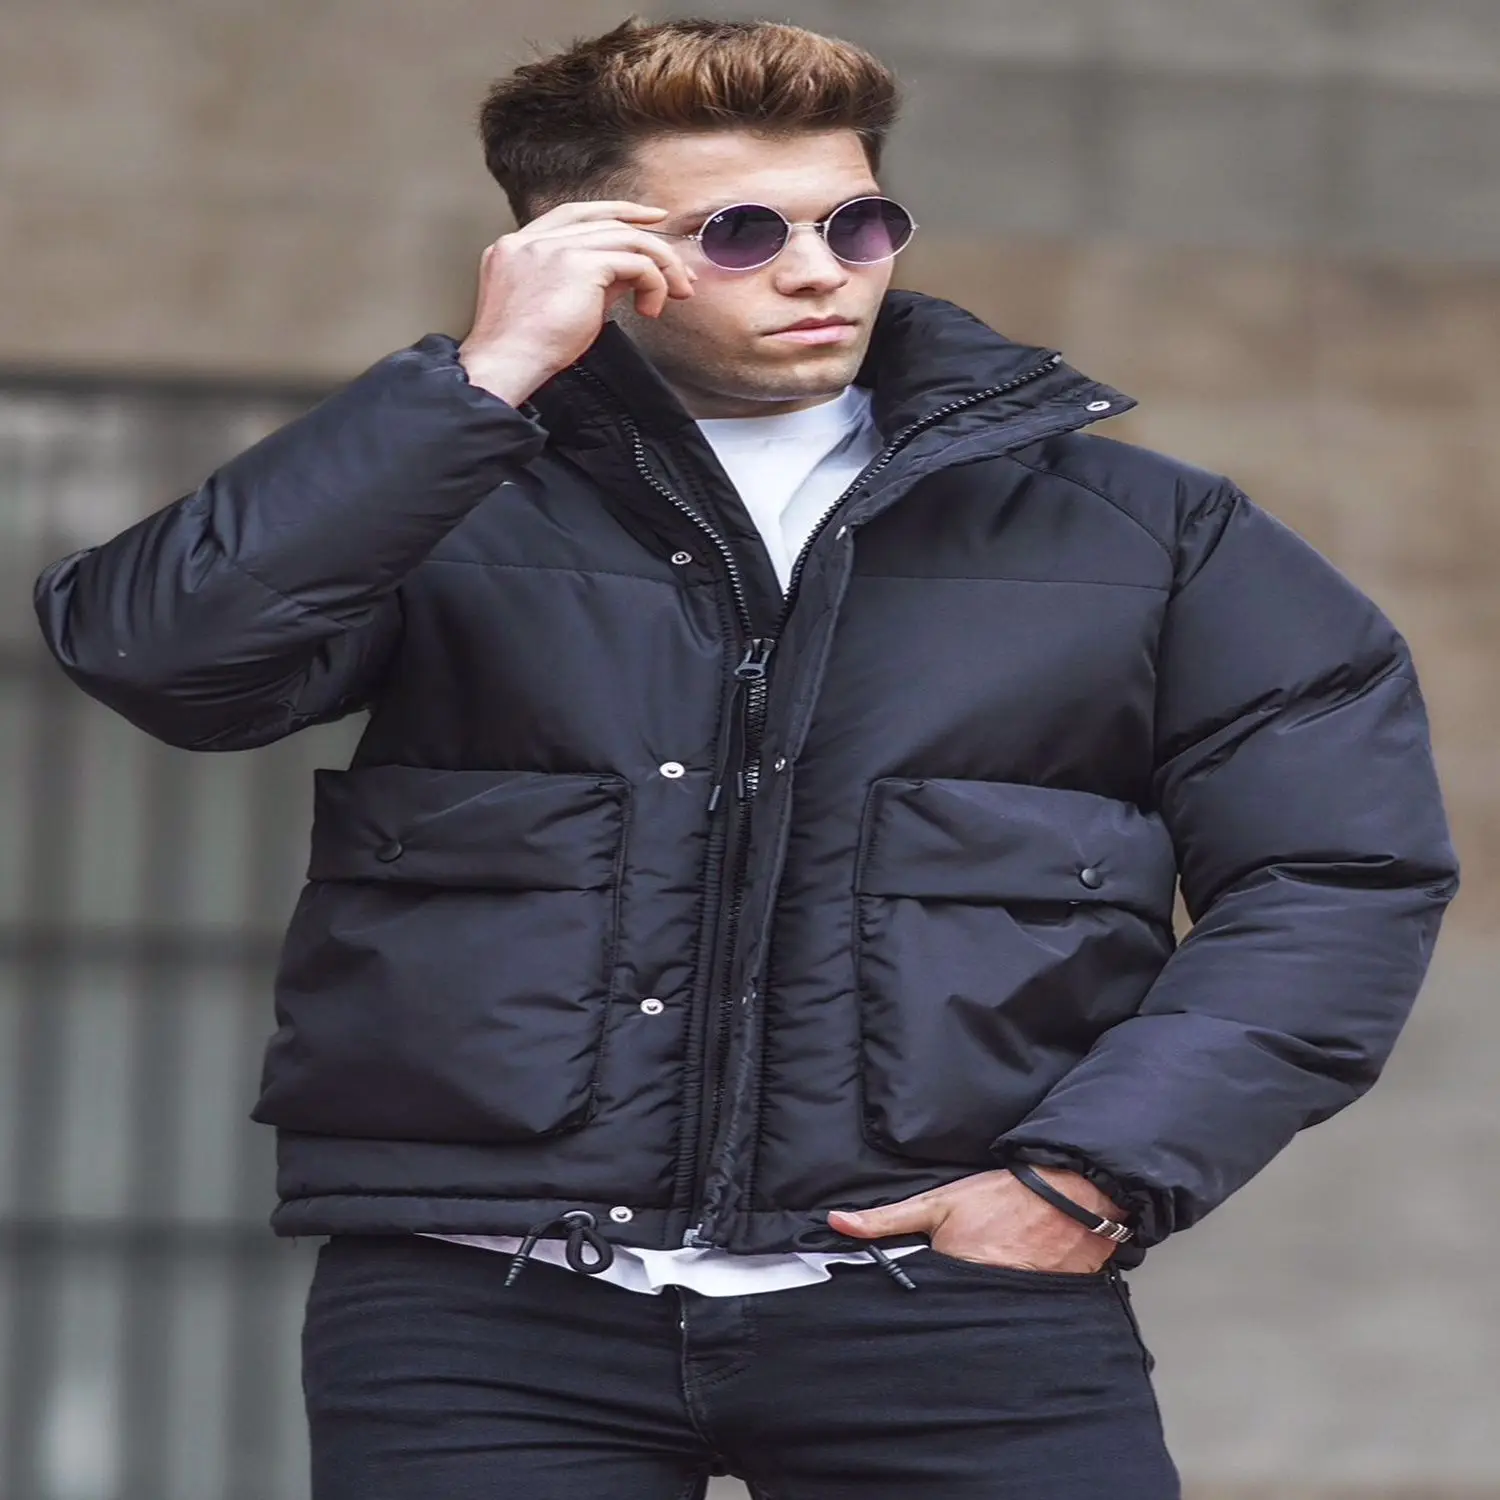 Male 2021 Inflatable Coat Pocket Detail new autumn winter jackets Parka men warm outerwear casual slim male overcoat